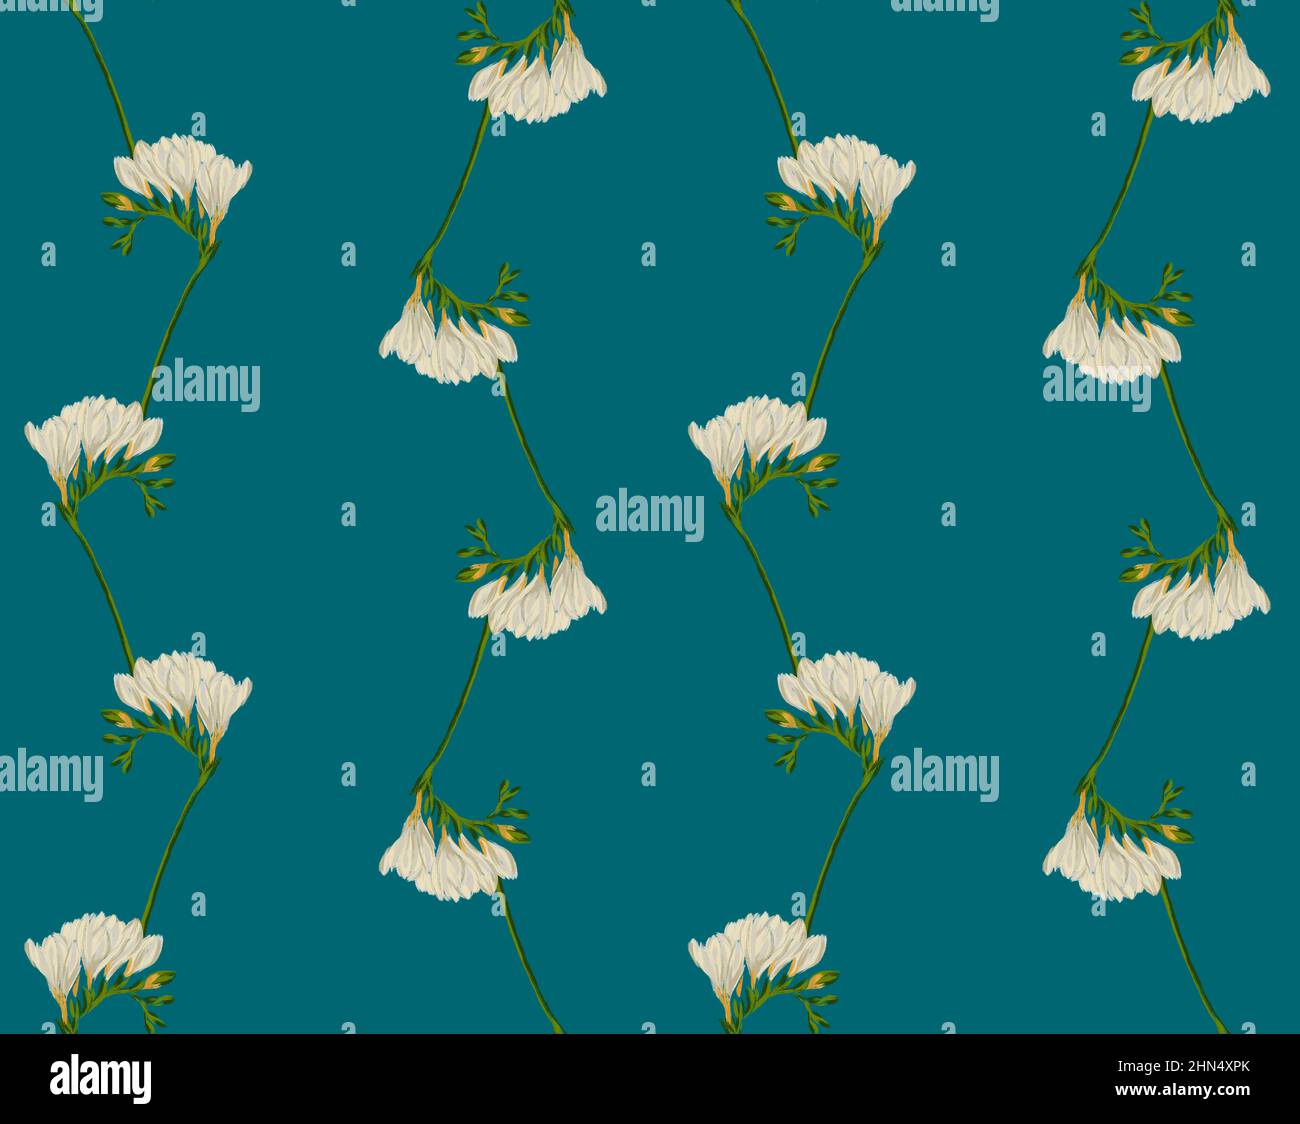 Freesia twig blooming with white flowers seamless pattern illustraion on blue background Stock Photo